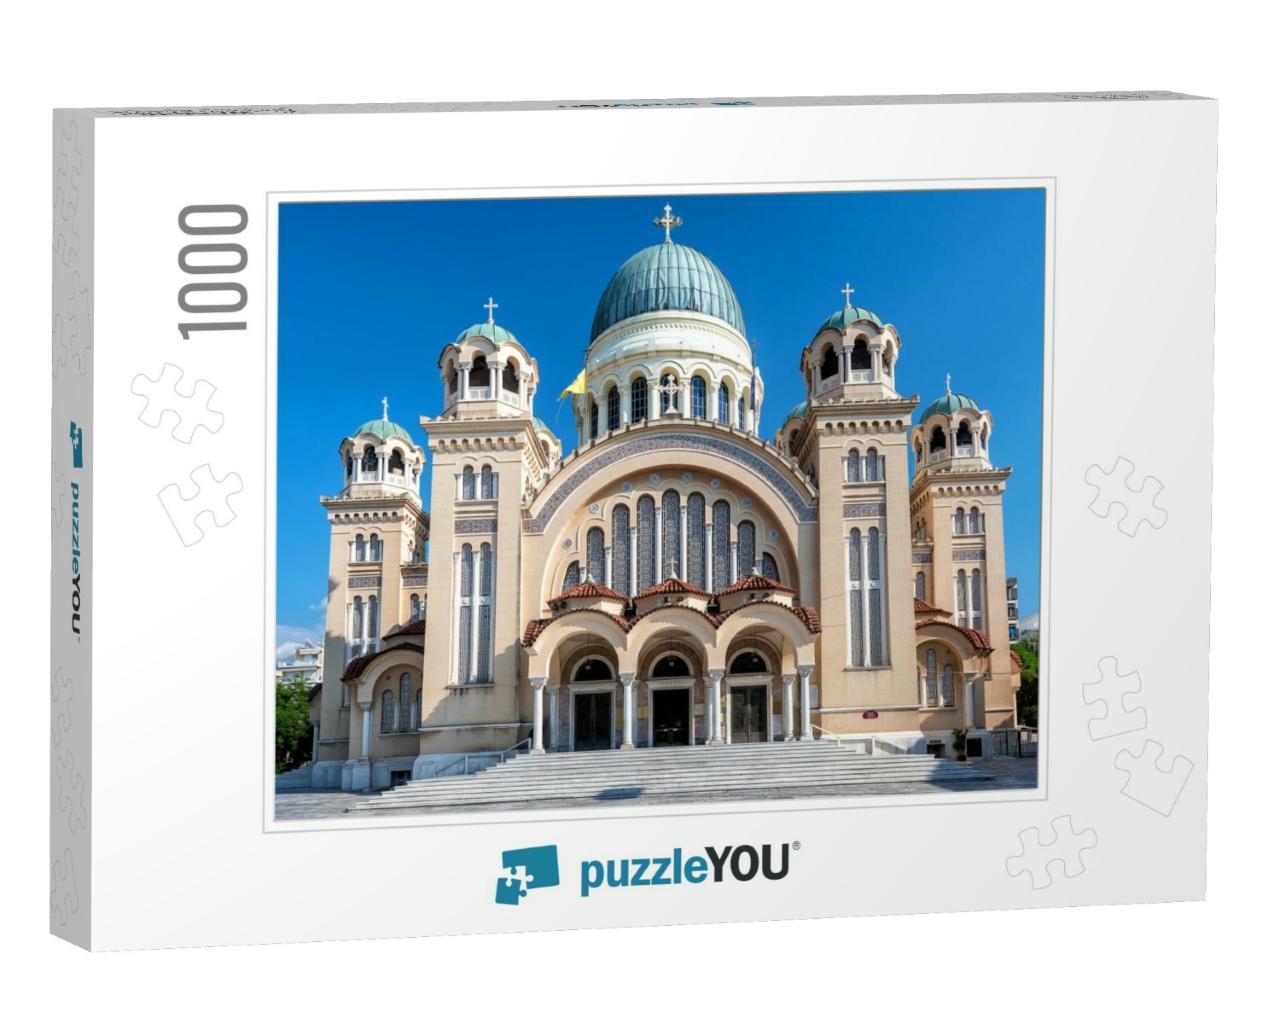 St. Andrews Church in Greece, Patras, Peloponnese, West... Jigsaw Puzzle with 1000 pieces